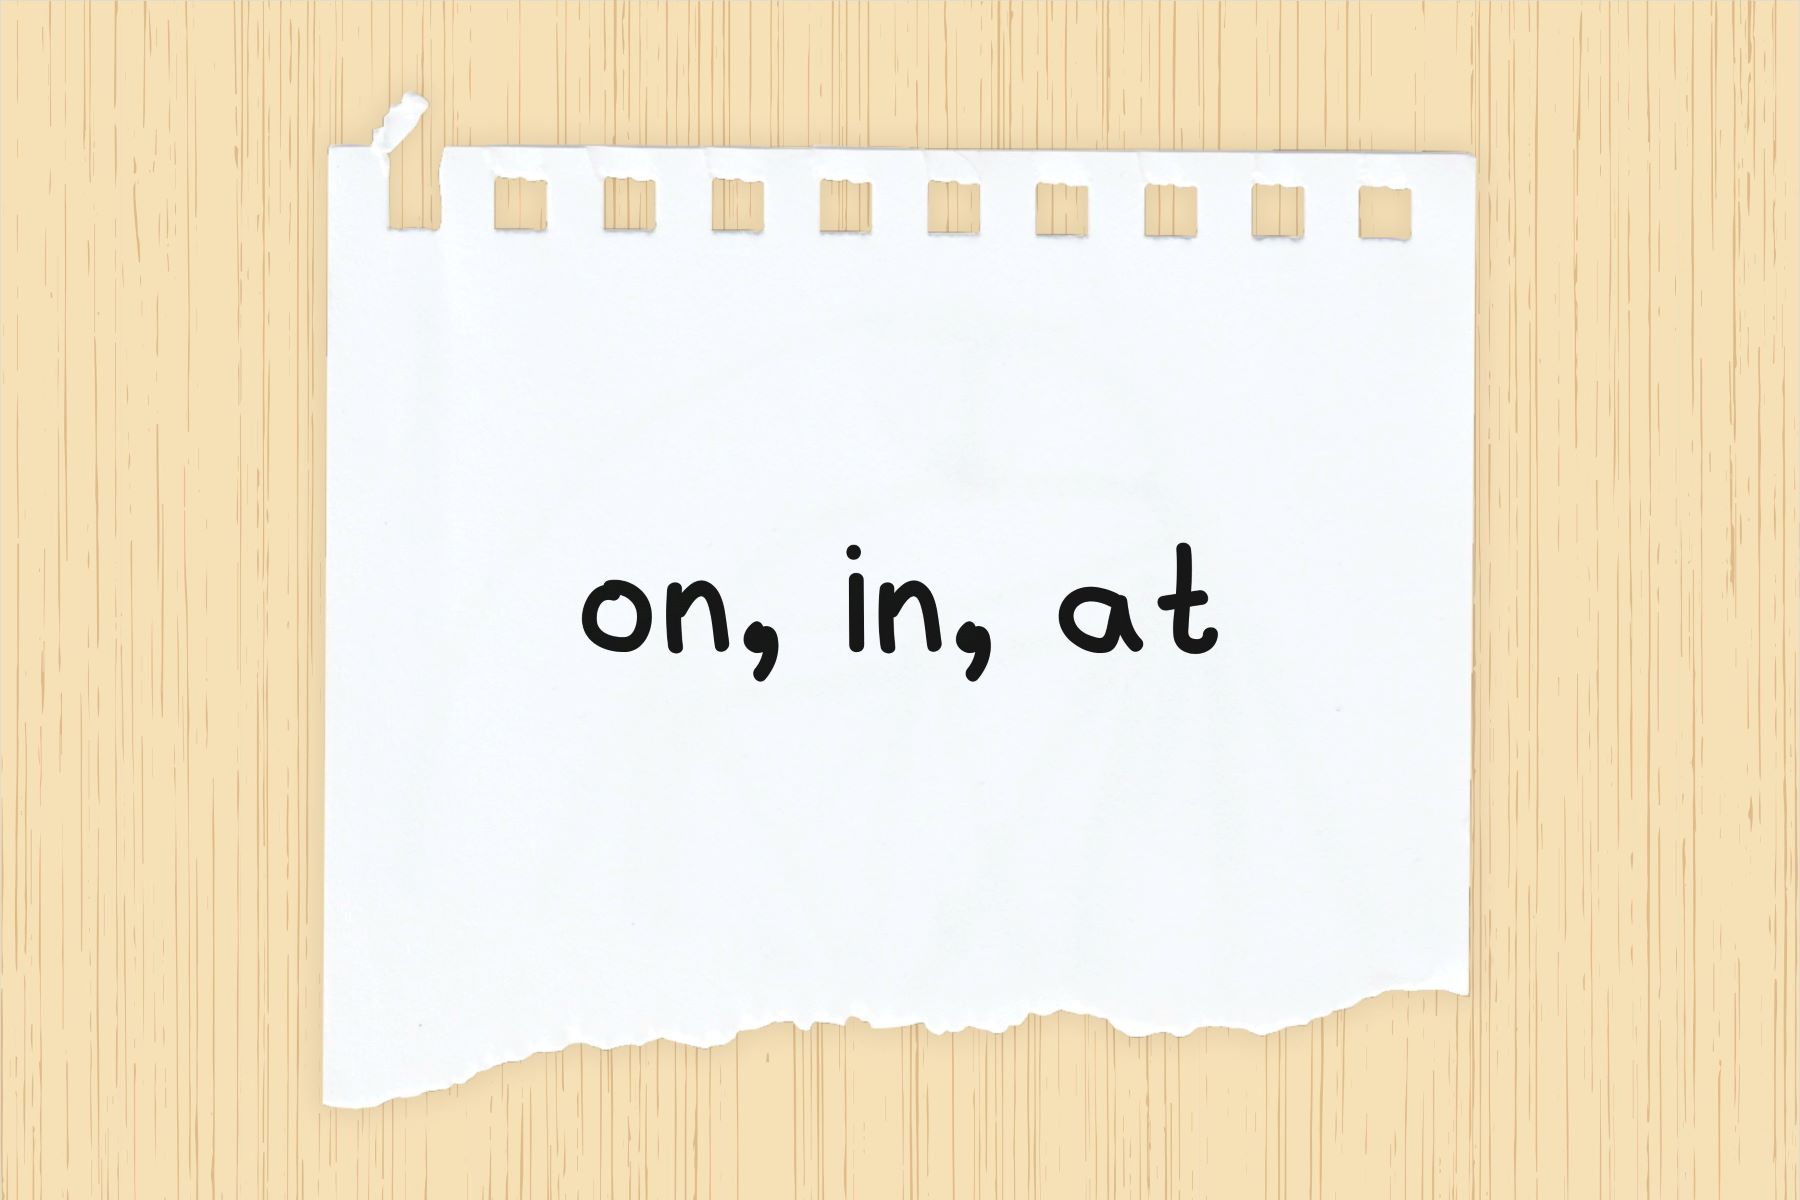 The Meaning And Usage Of Prepositions With Days: On, In, And At